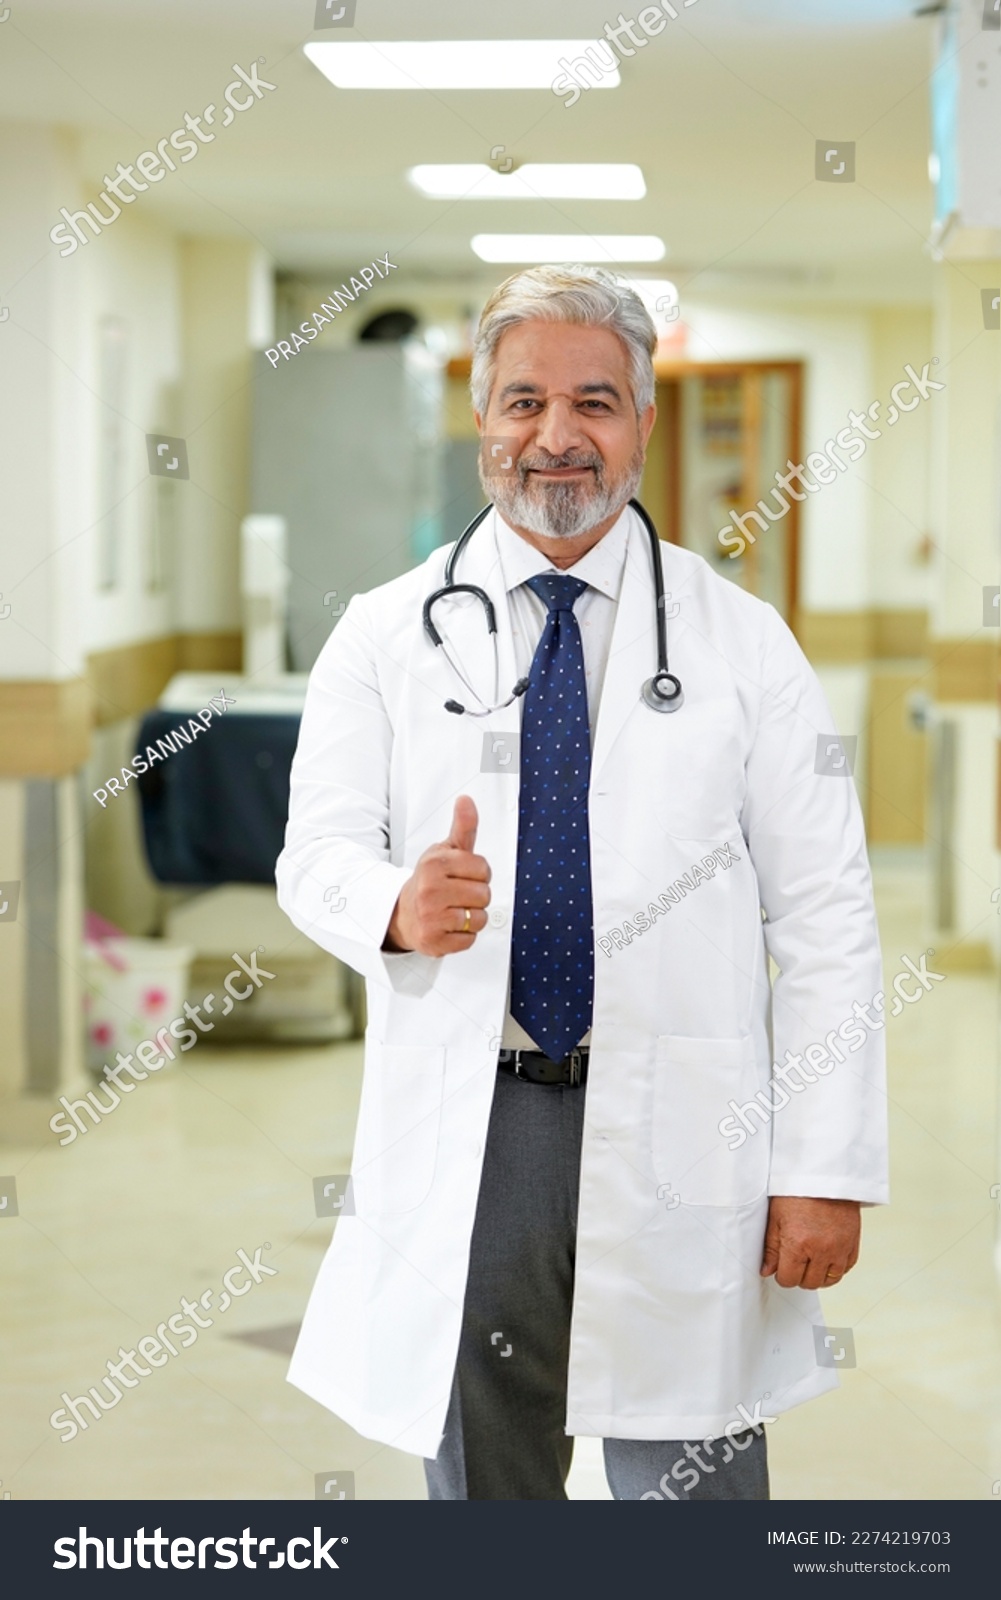 Indian male doctor showing thumps up at hospital. #2274219703